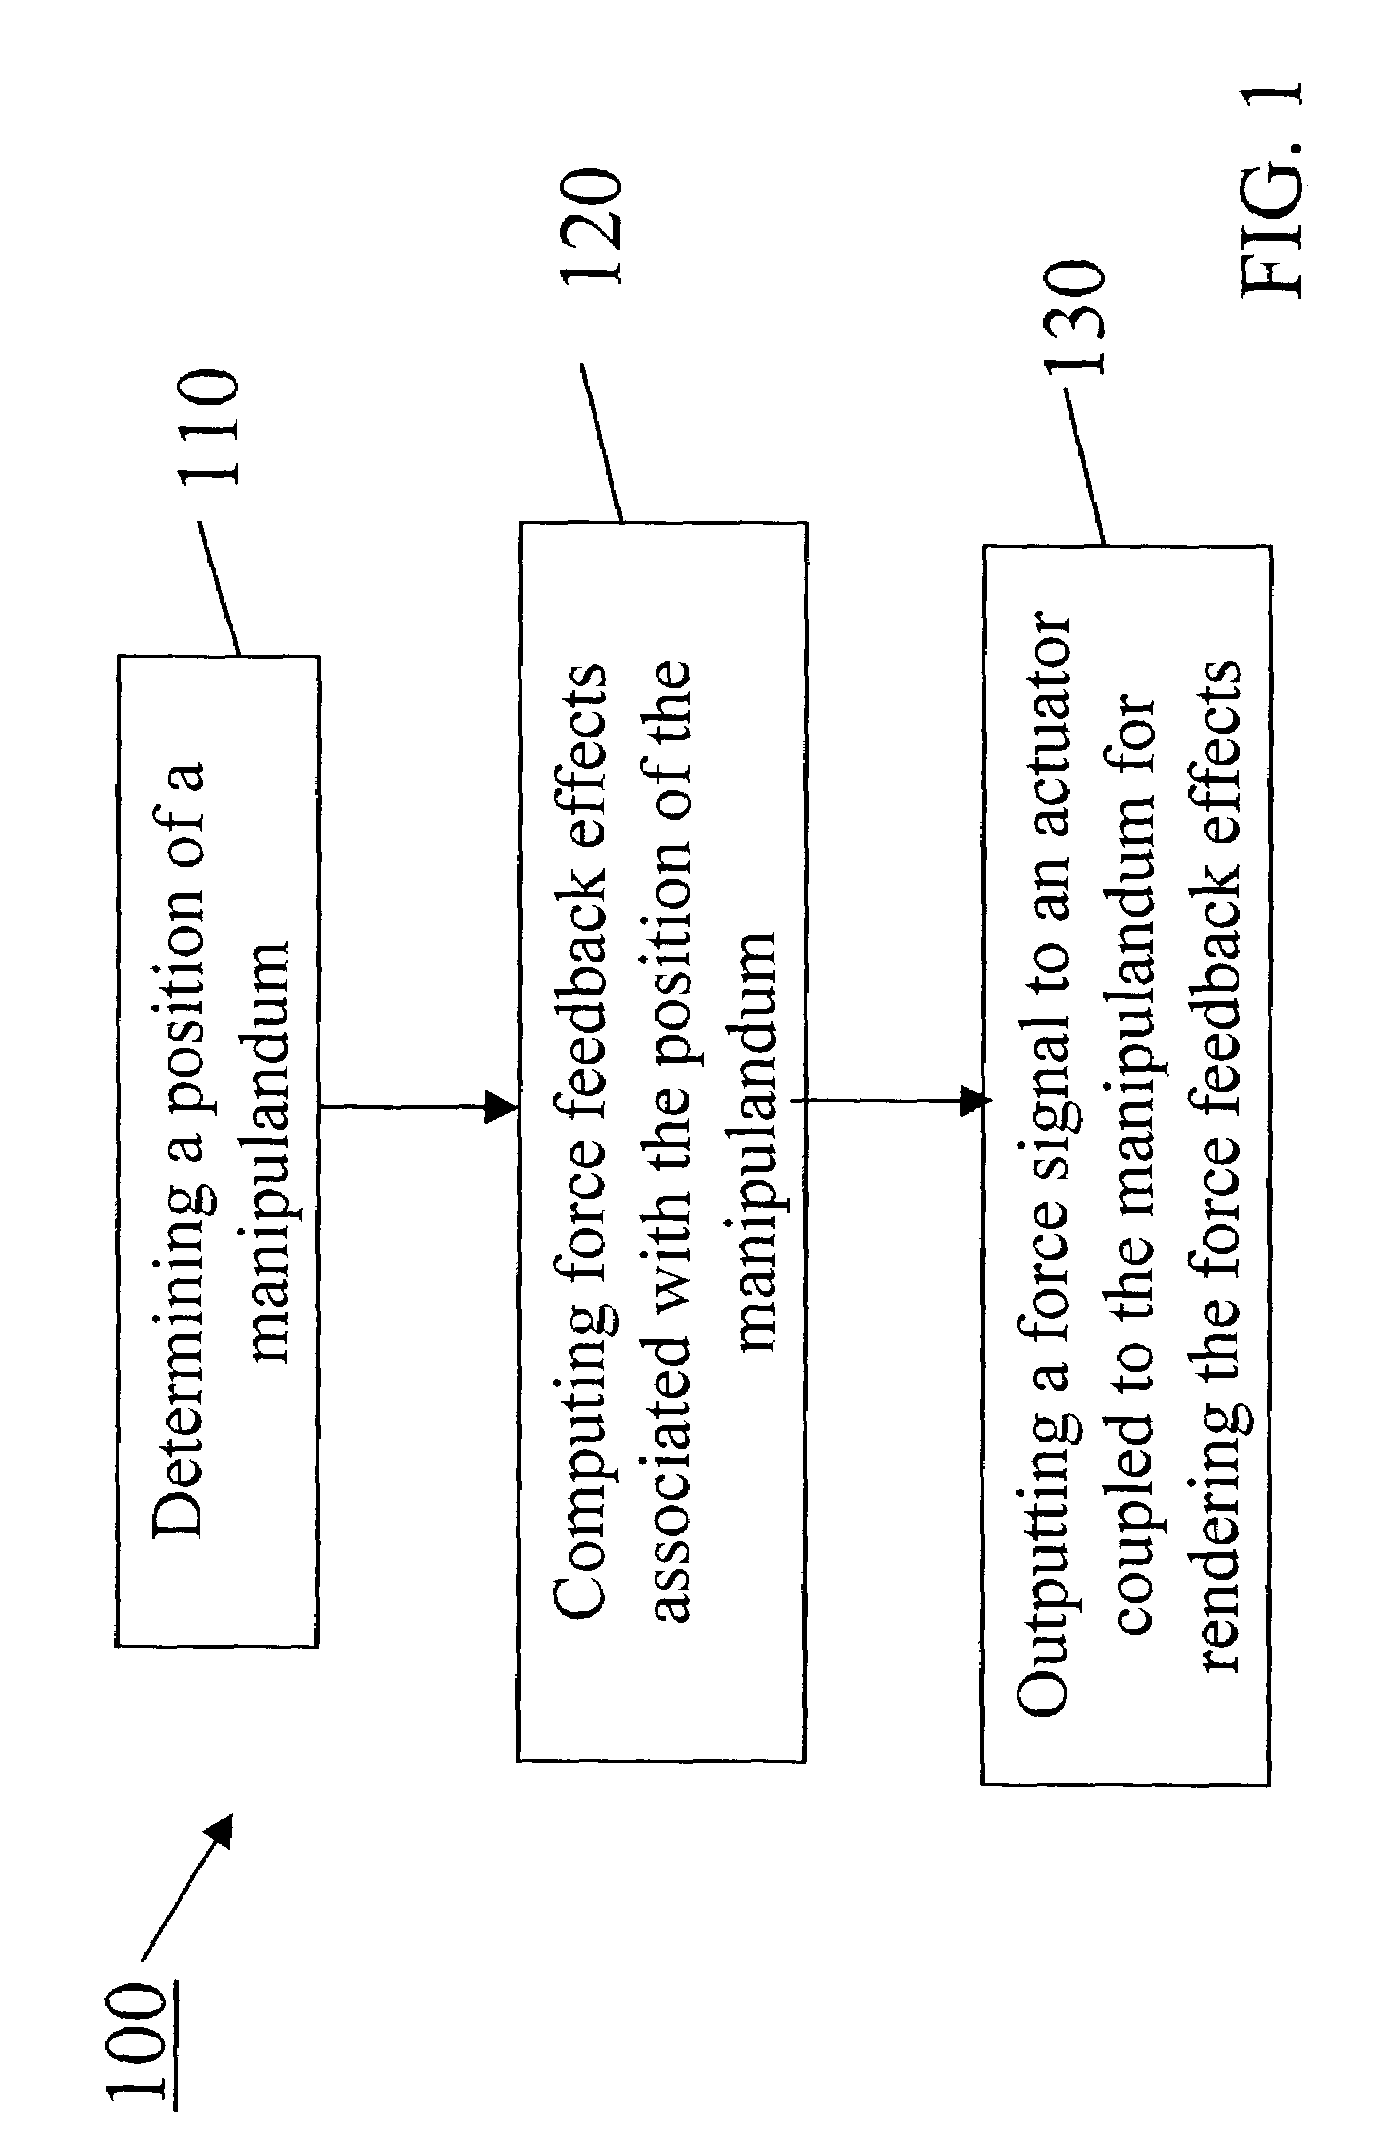 Hierarchical methods for generating force feedback effects